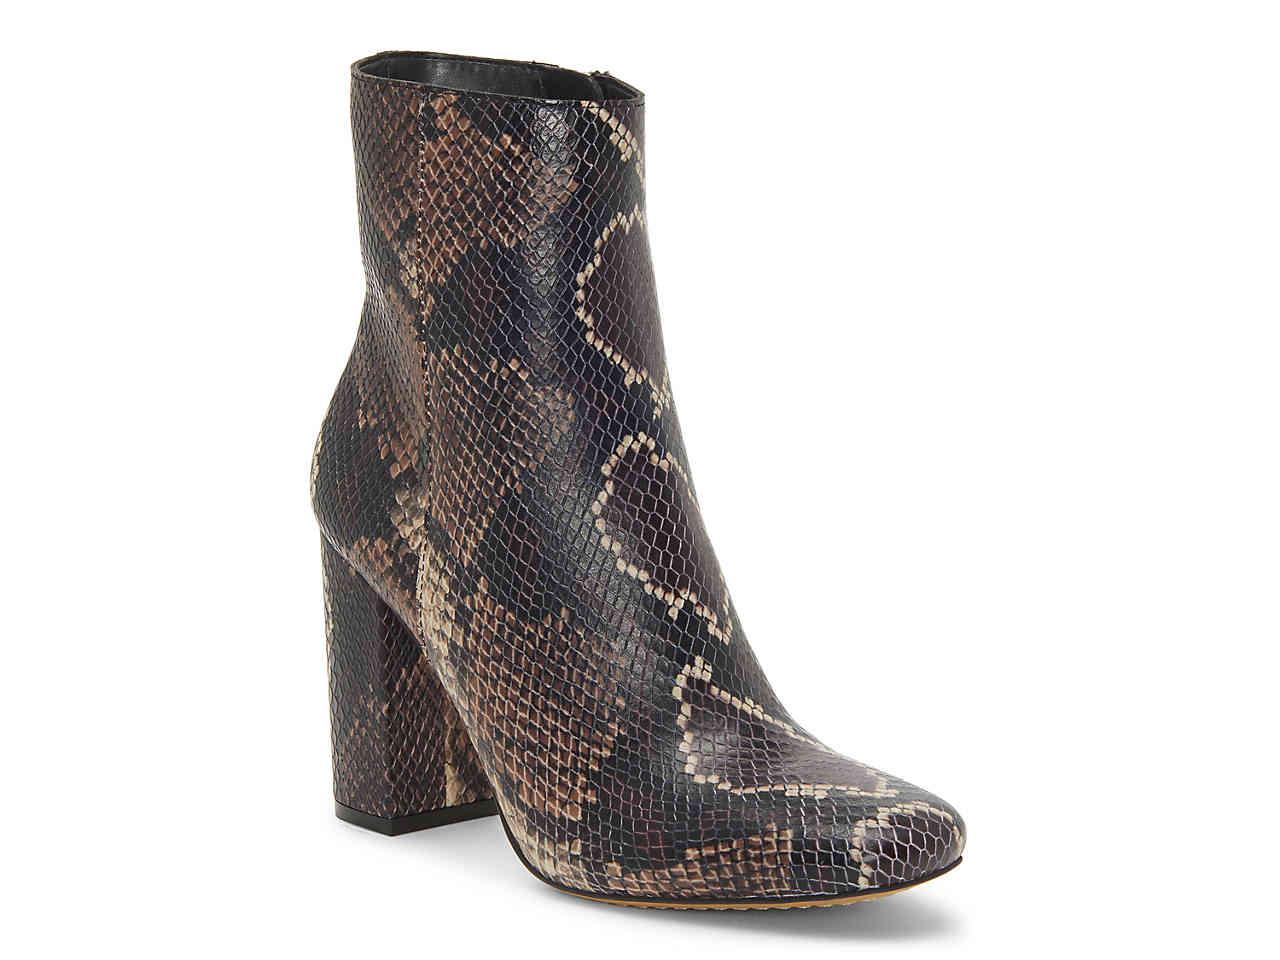 Vince Camuto Synthetic Dannia Bootie in Dark Brown Snake Print Leather ...